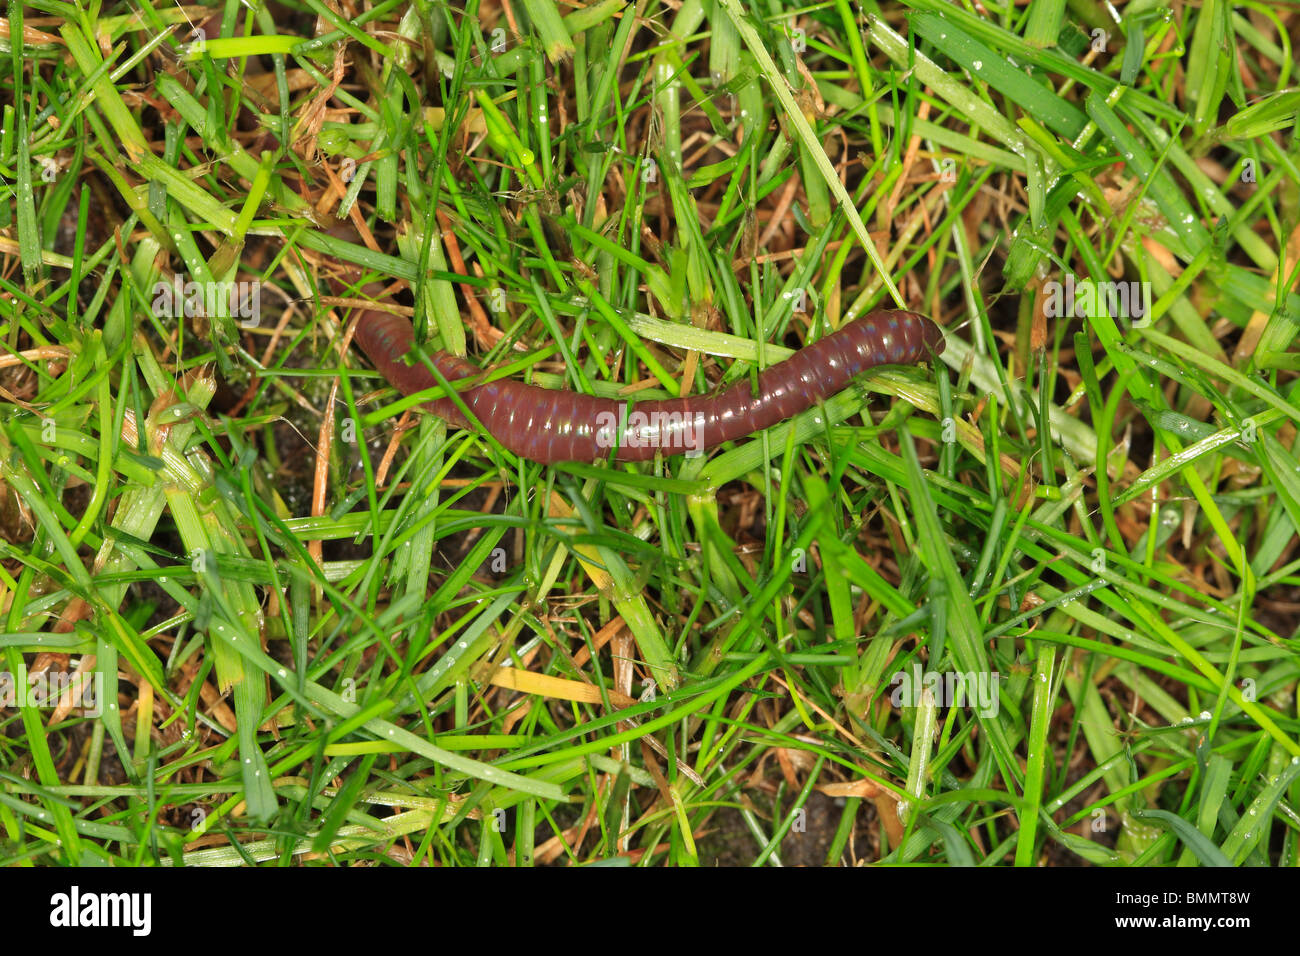 EARTHWORM (Lumbricus terrestis) COMES PARTIALLY OUT OF BURROW TO FIND FOOD AT NIGHT Stock Photo